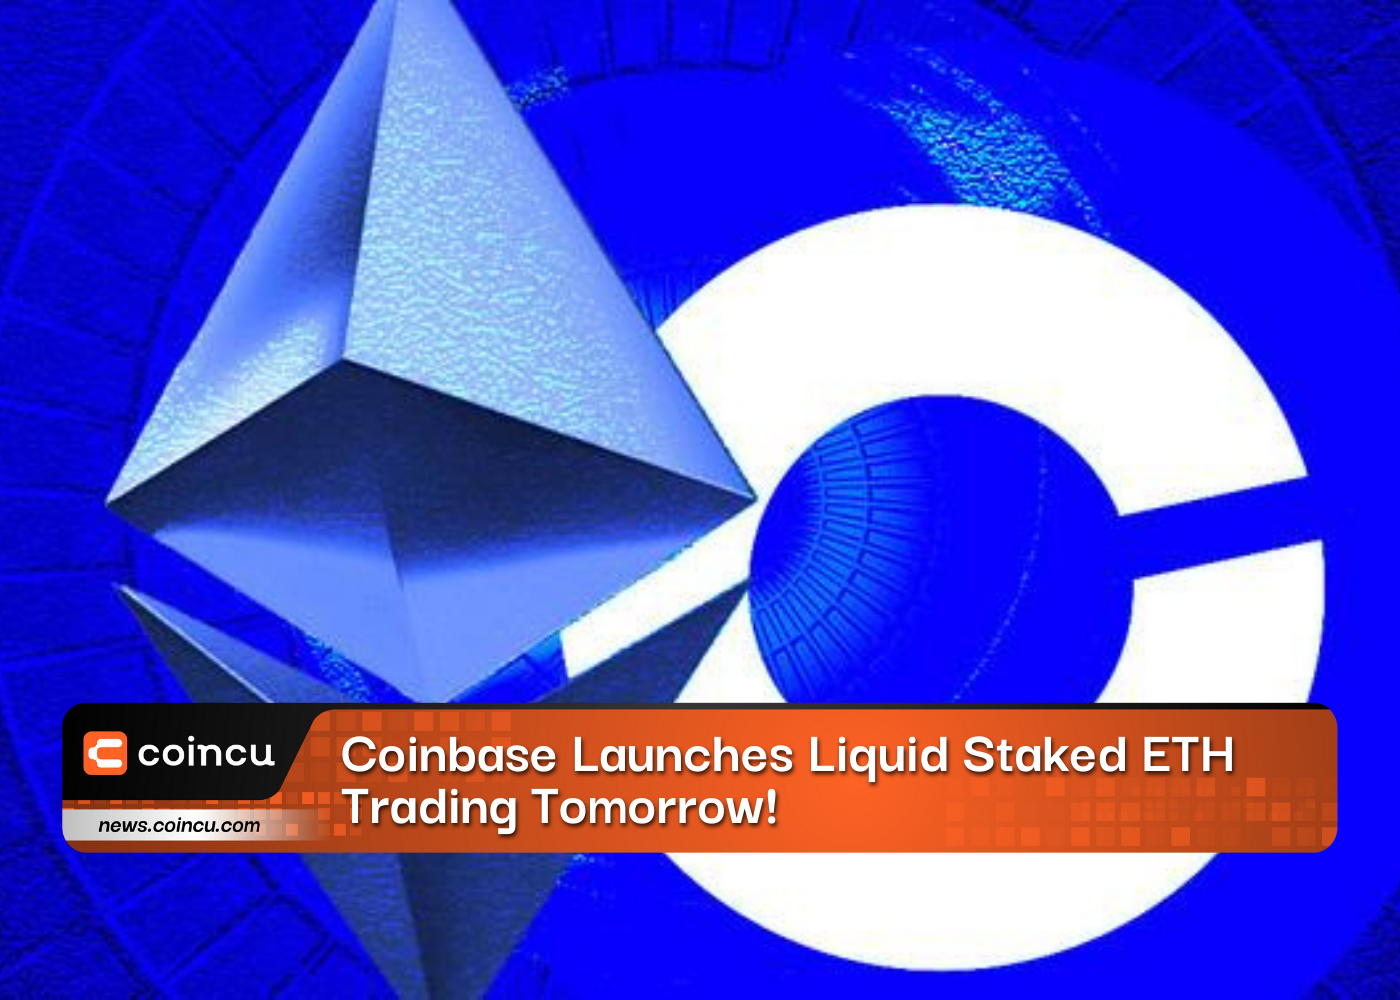 Coinbase Launches Liquid Staked ETH